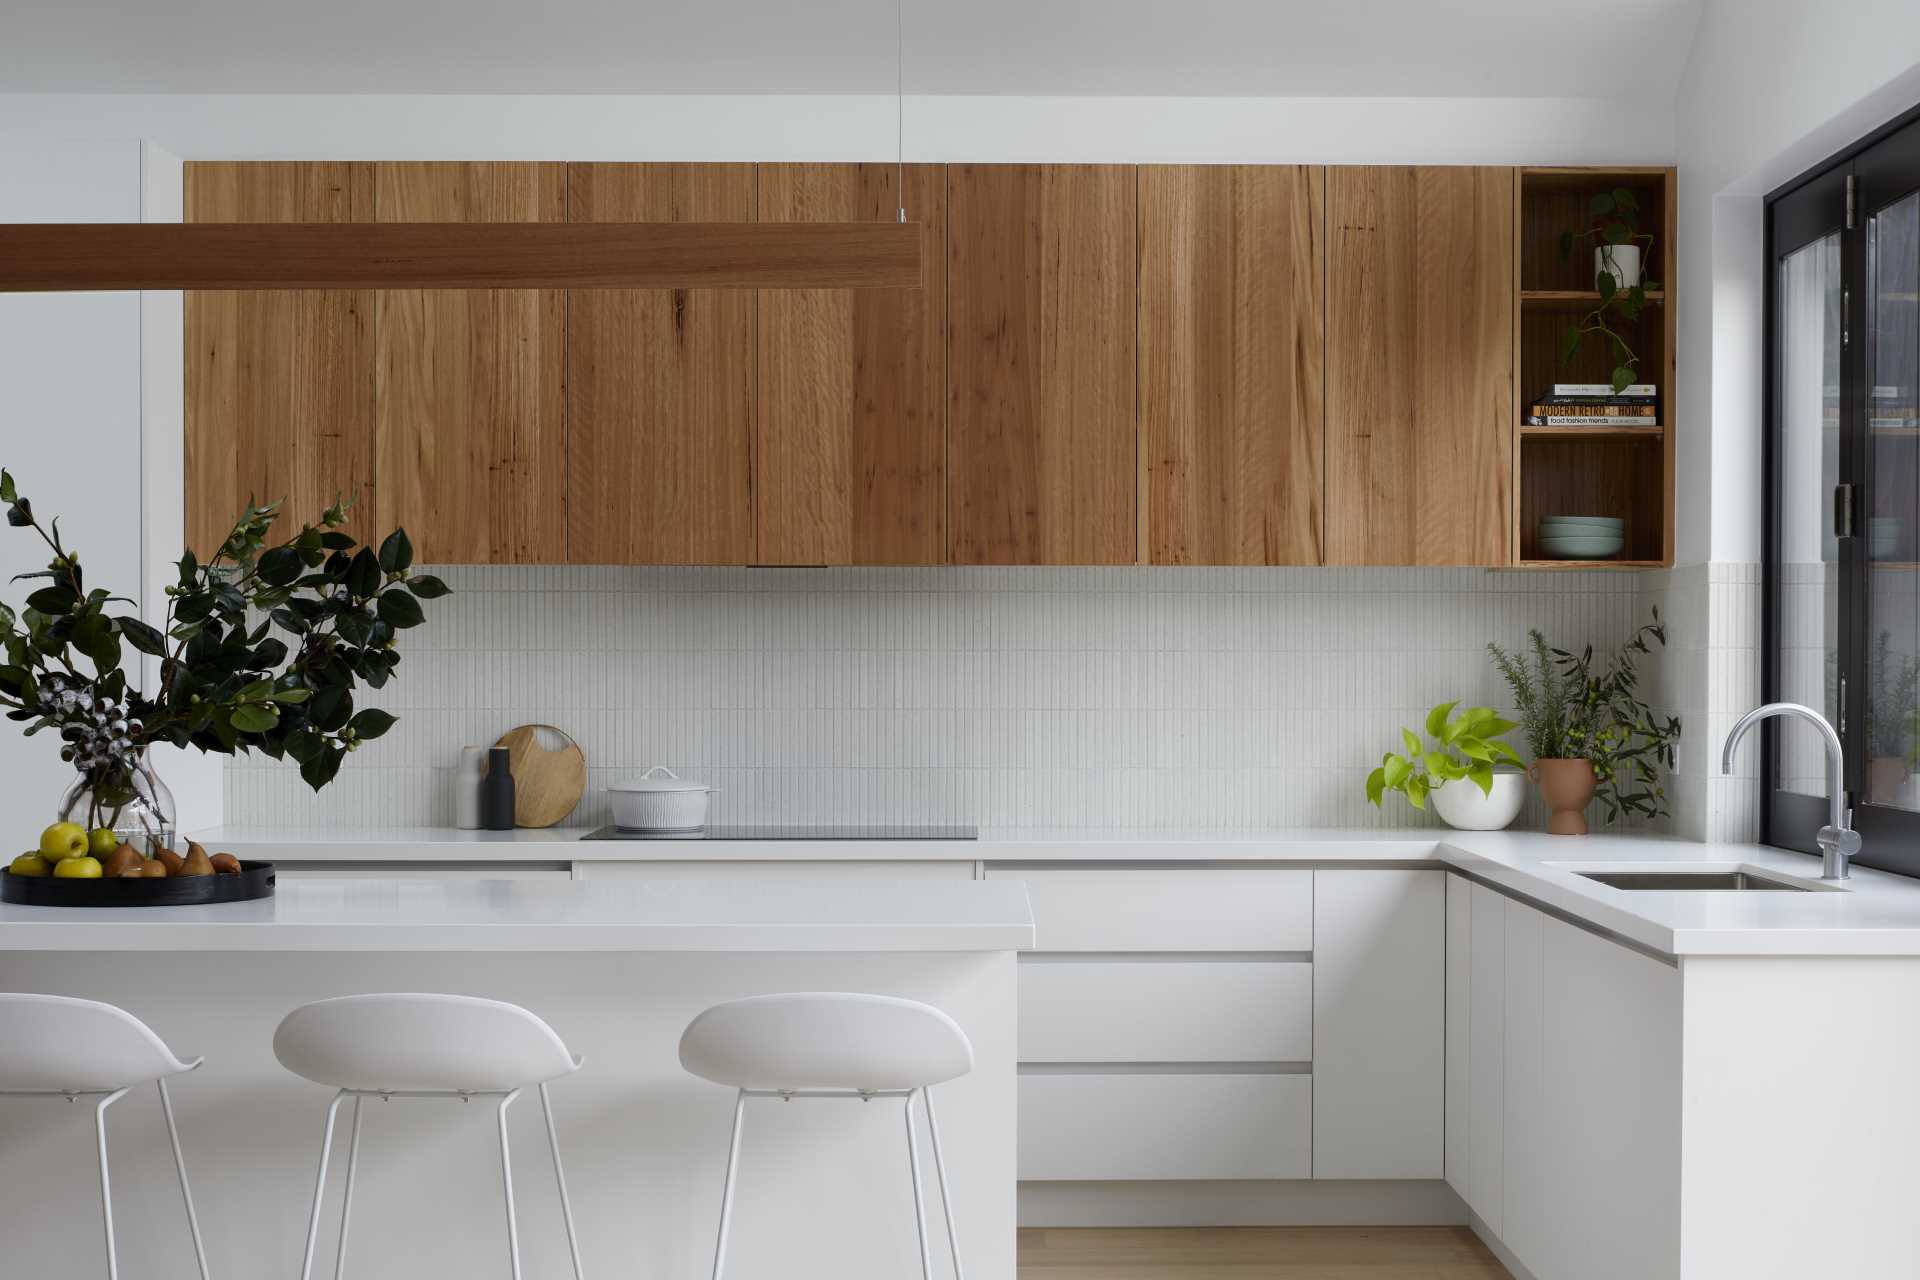 The folding pass-through window connects the kitchen to the outdoor space, while the rest of the kitchen includes white and wood cabinets, a skylight, and an island with open shelving.